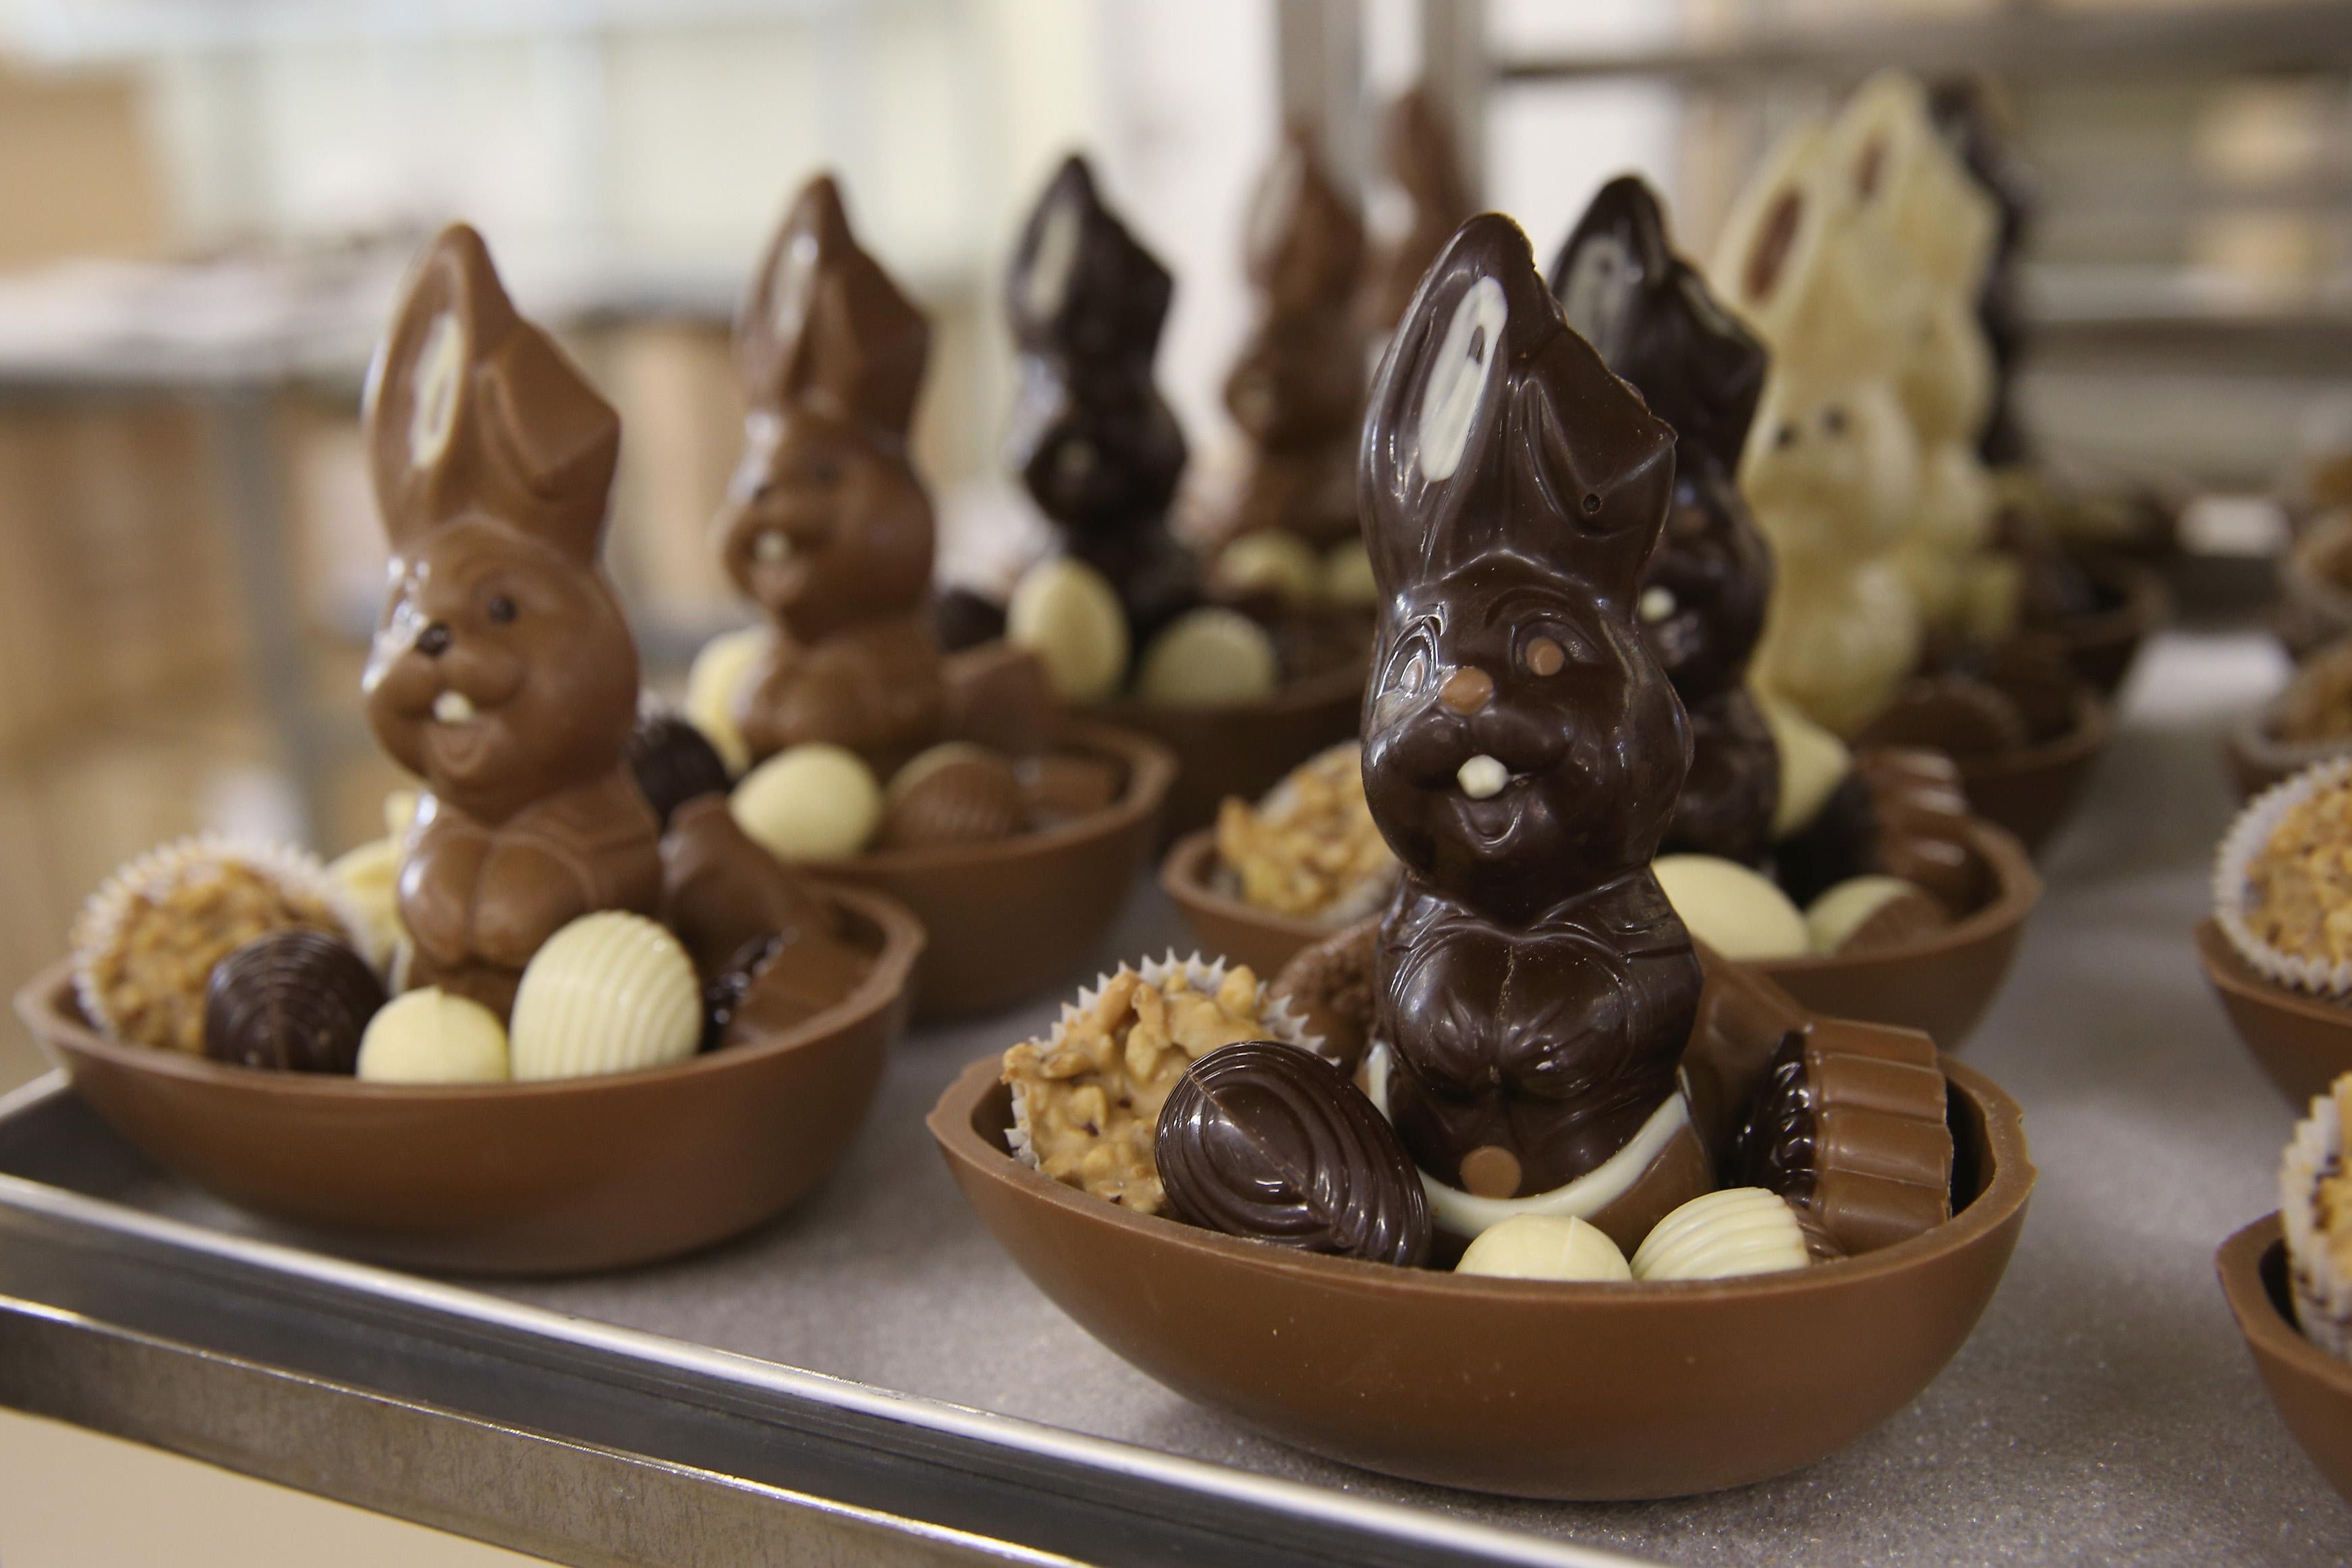 Chocolate Easter bunnies and eggs.